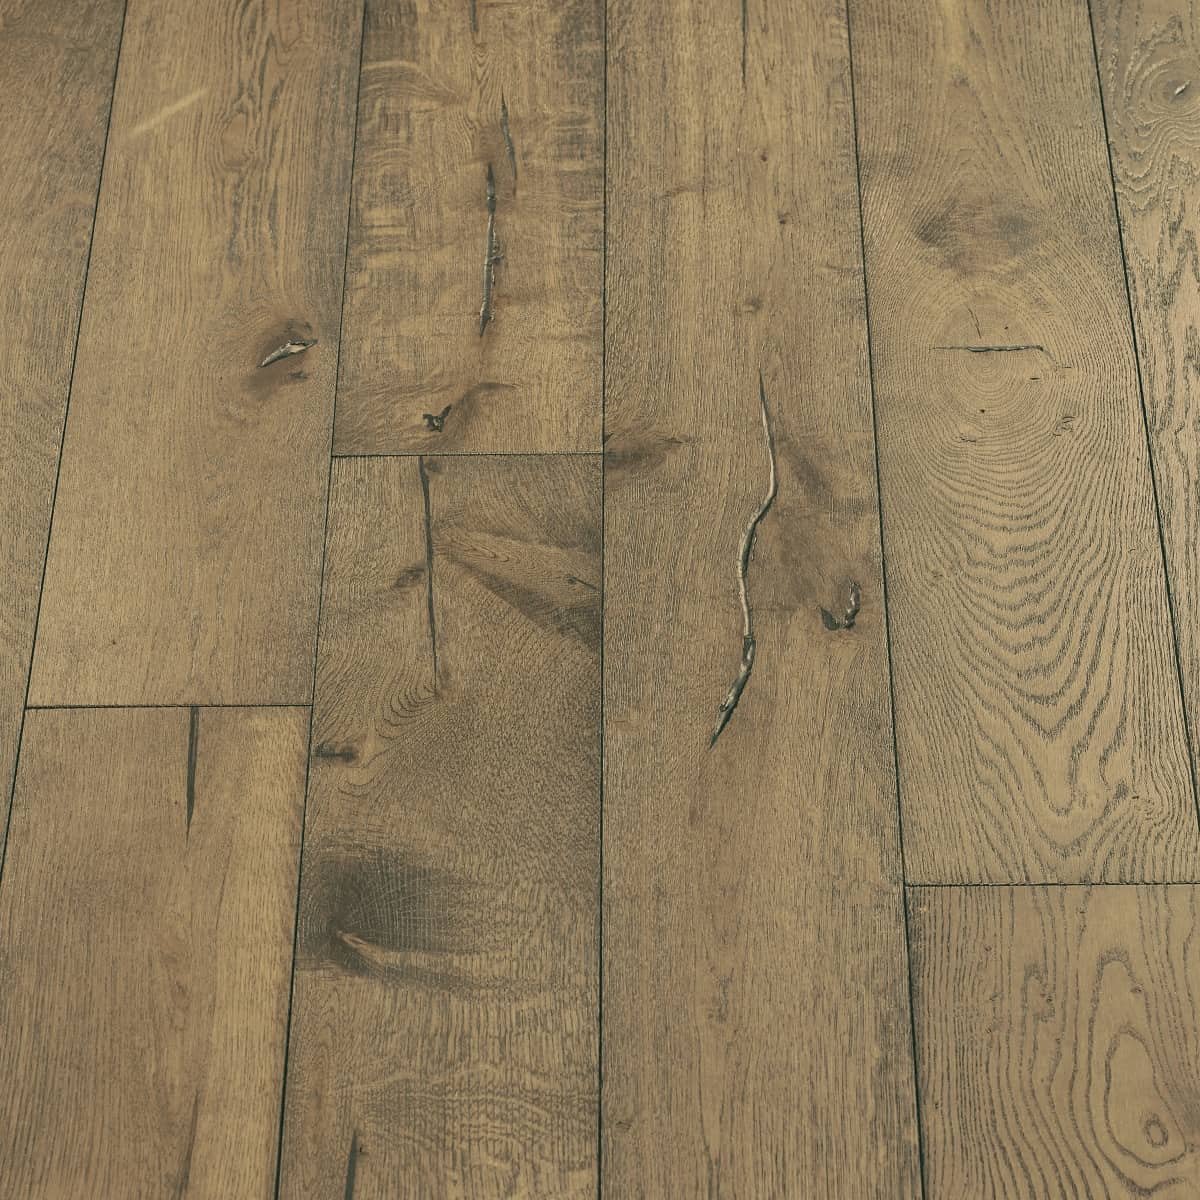 Distressed Silk WoodFlooring - image featuring distressed silk-colored wood flooring with a smooth and elegant surface, creating a blend of rustic and refined aesthetics.